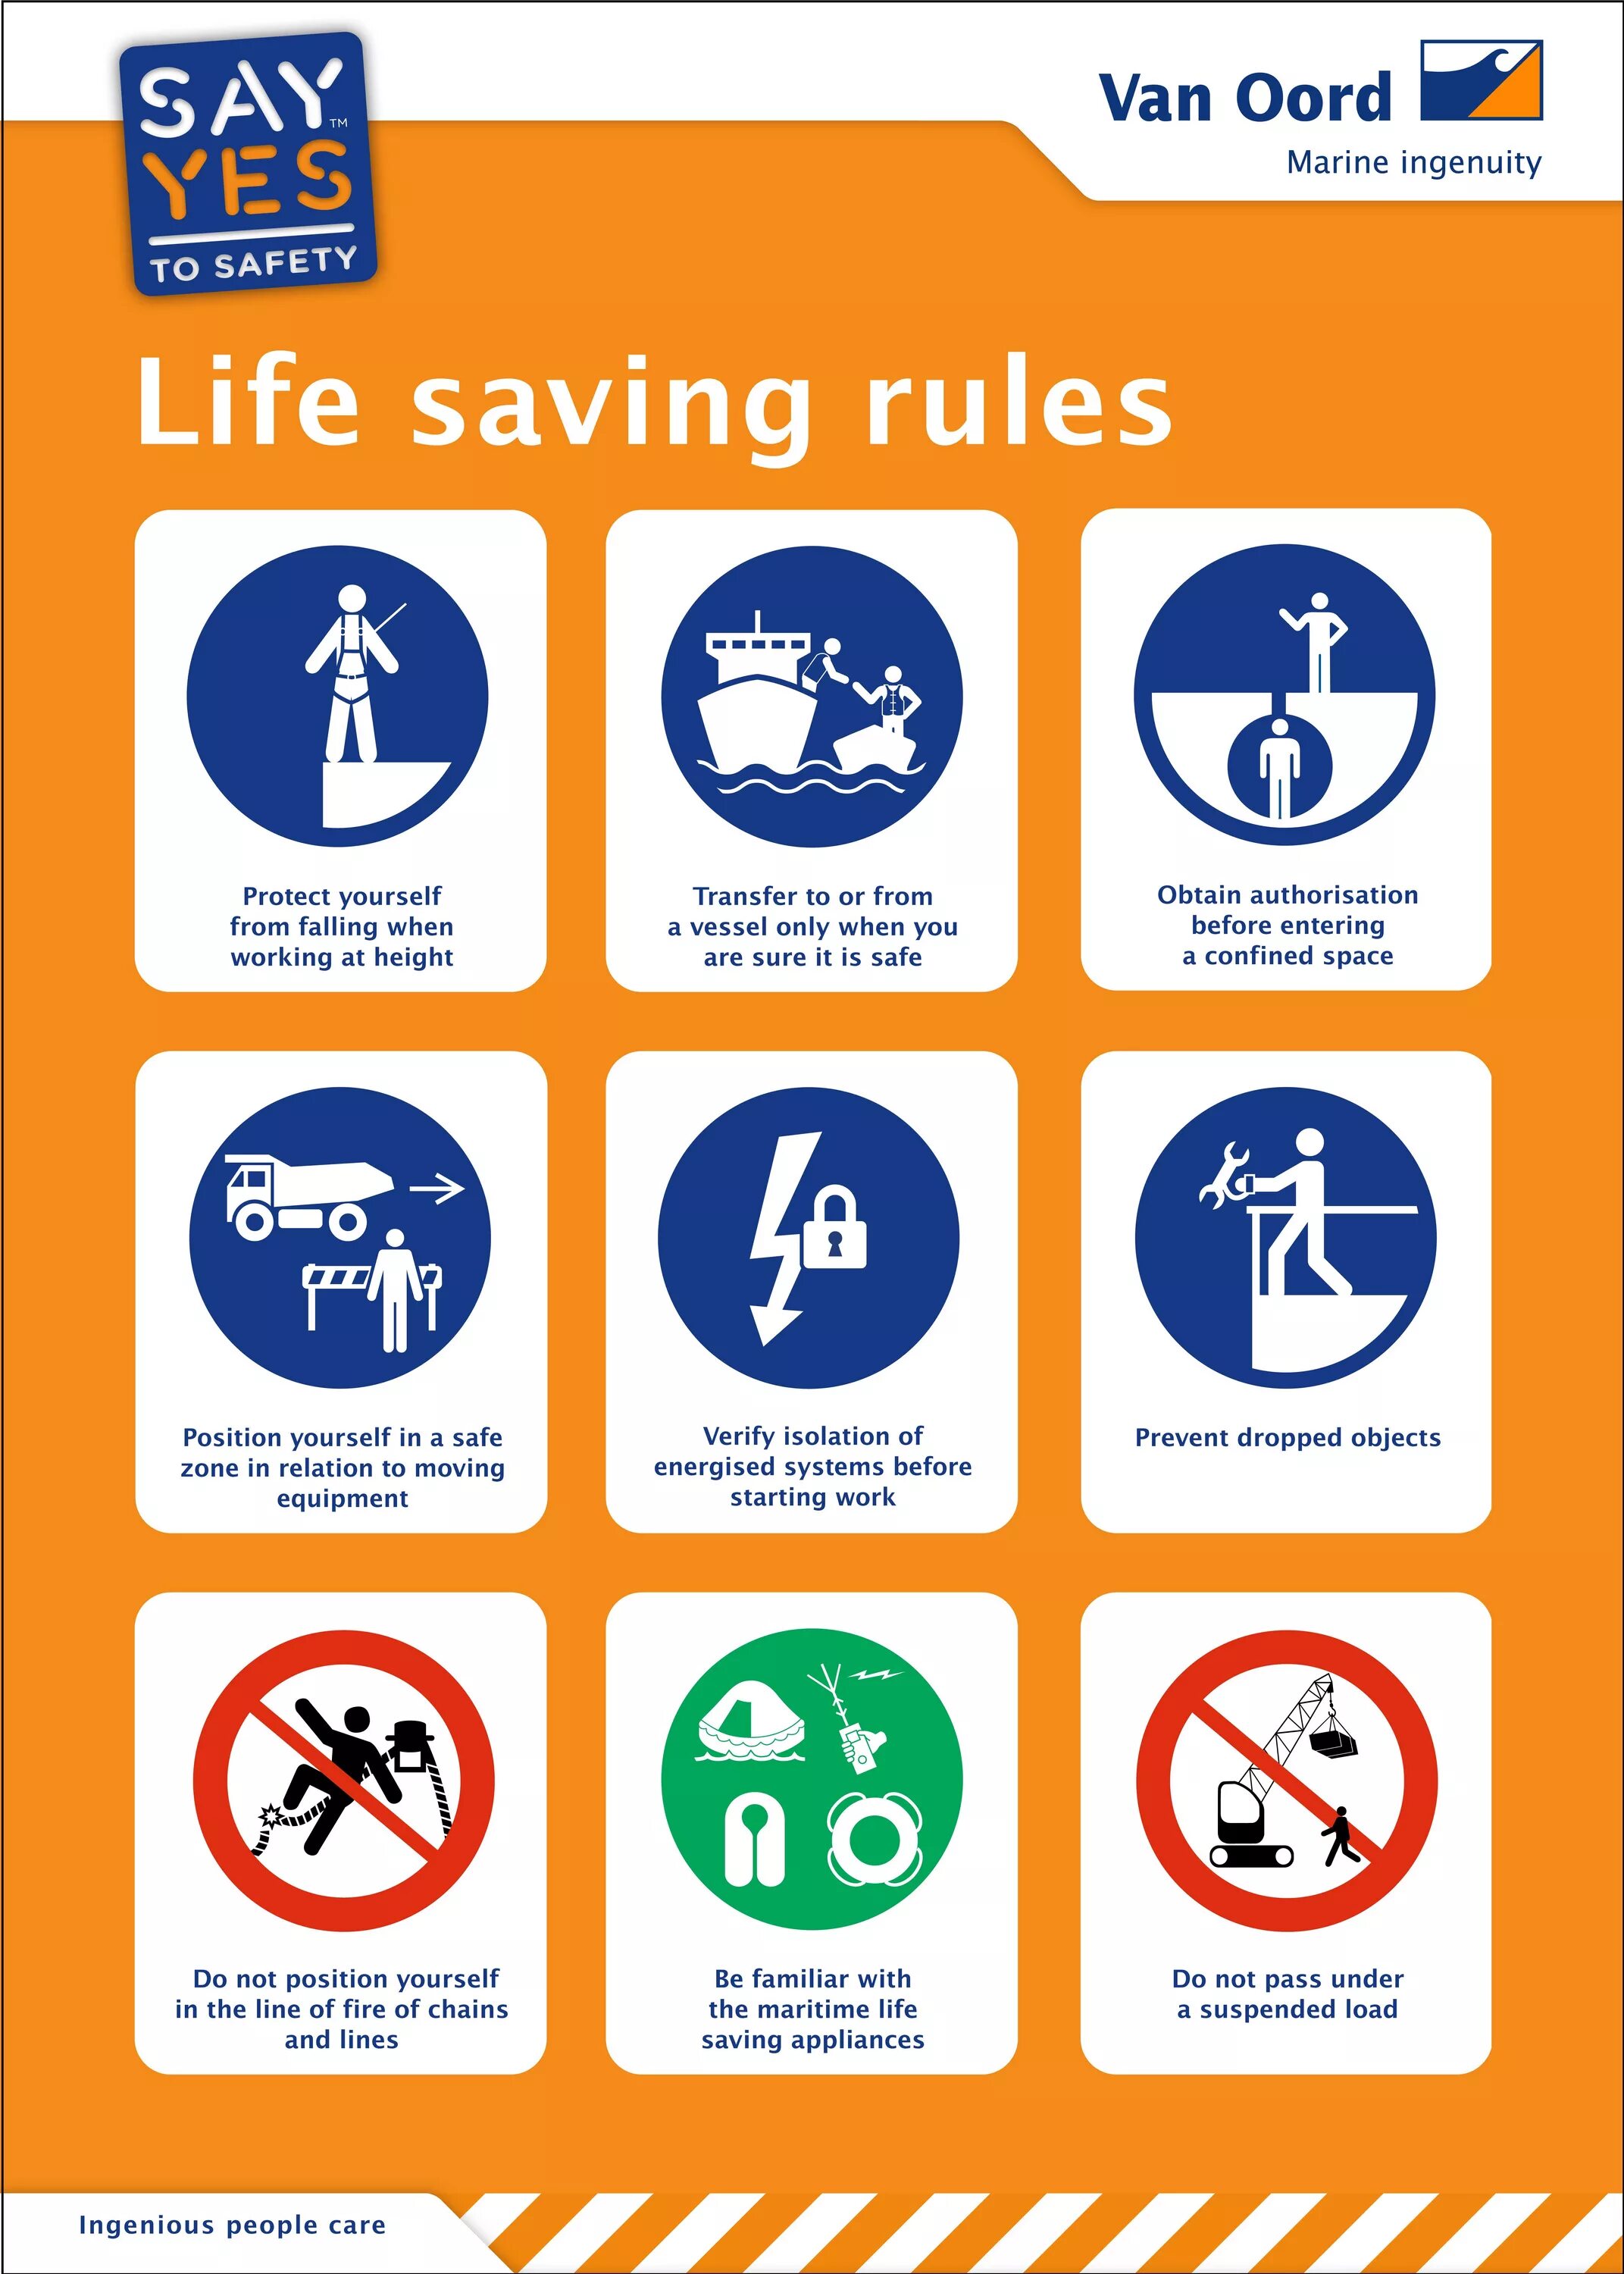 Life saving Rules. Safety poster. Life Safety Rules. Van Oord Marine ingenuity.